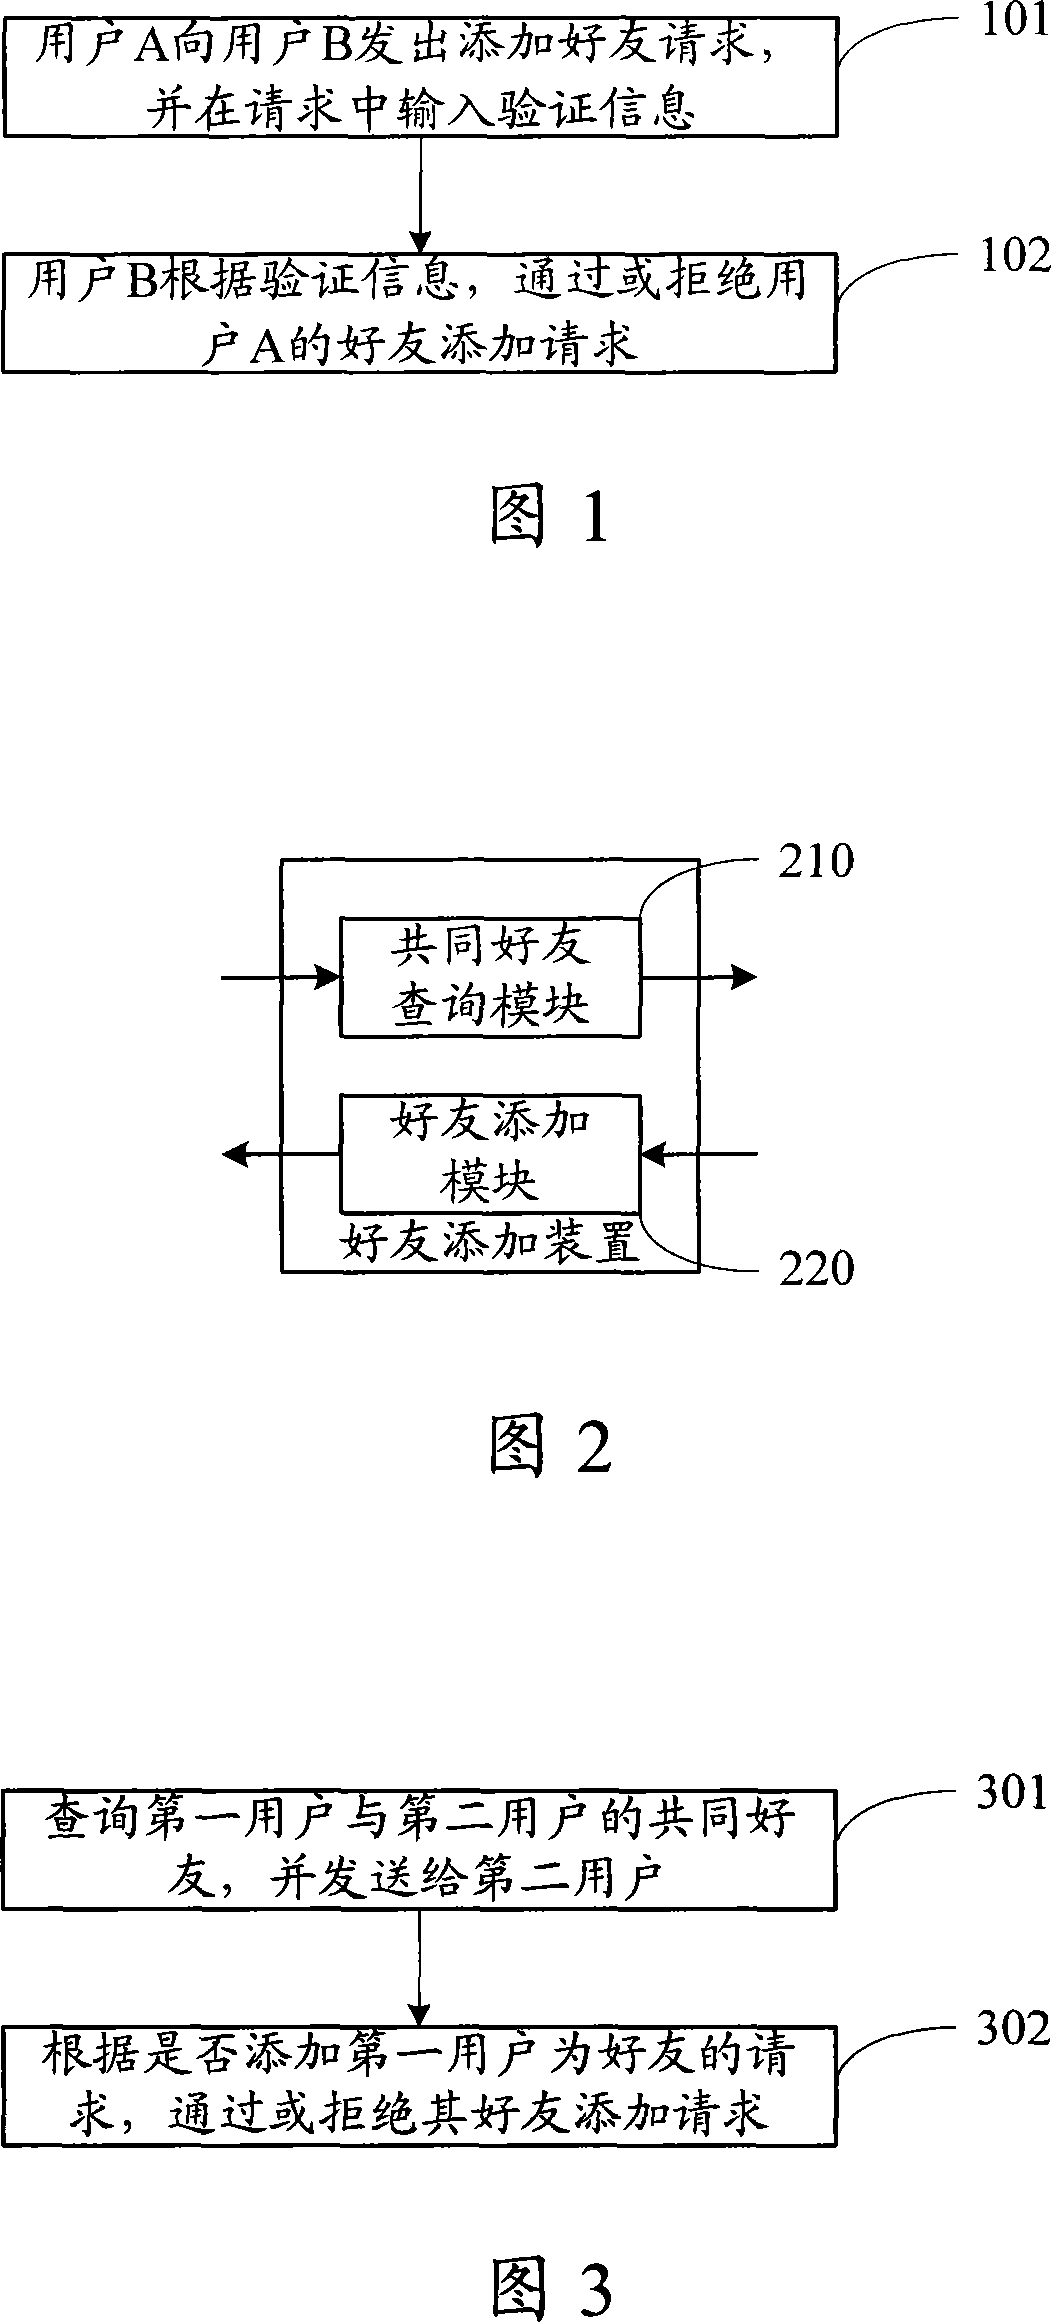 Friend addition device and method